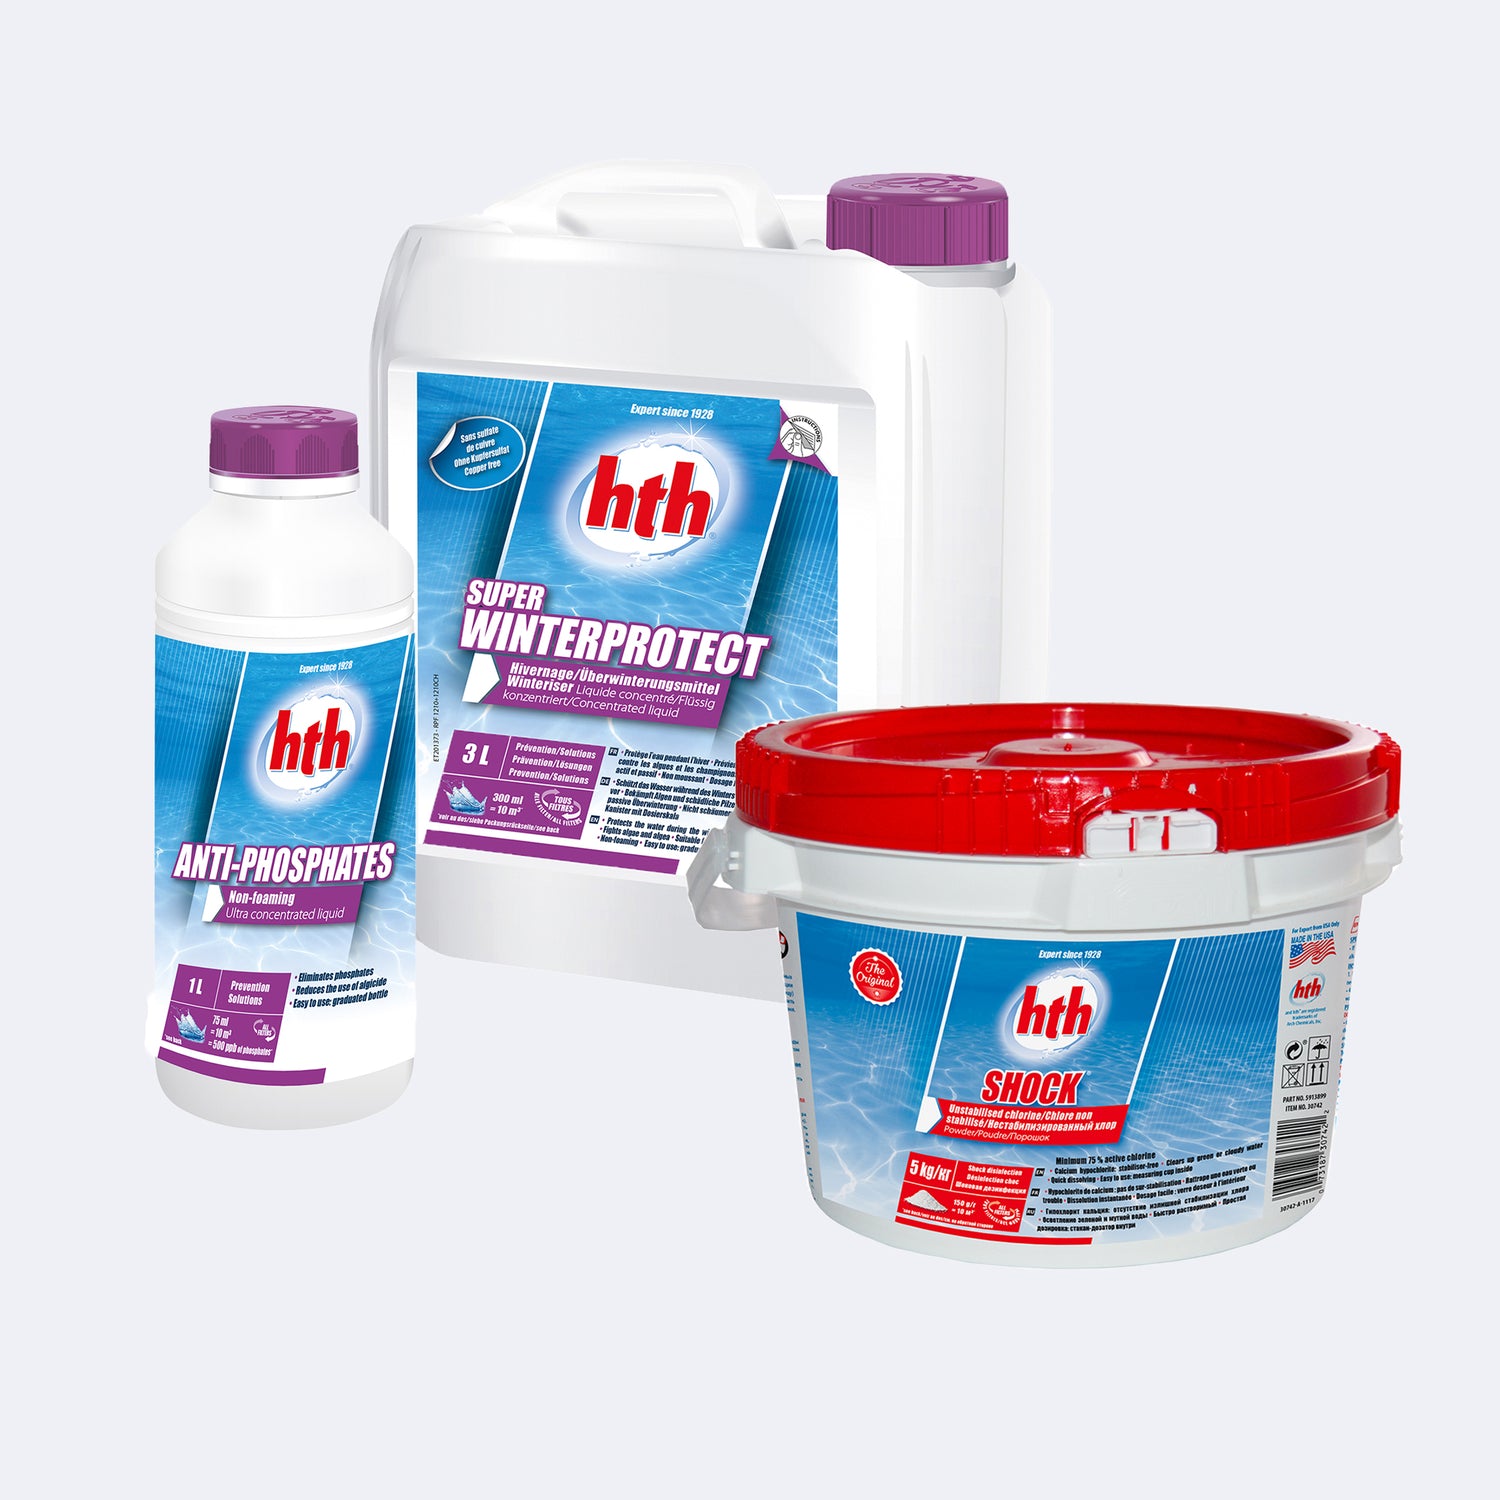 Selection of bottles and tubs of pool chemicals, cutout images on plain grey background.